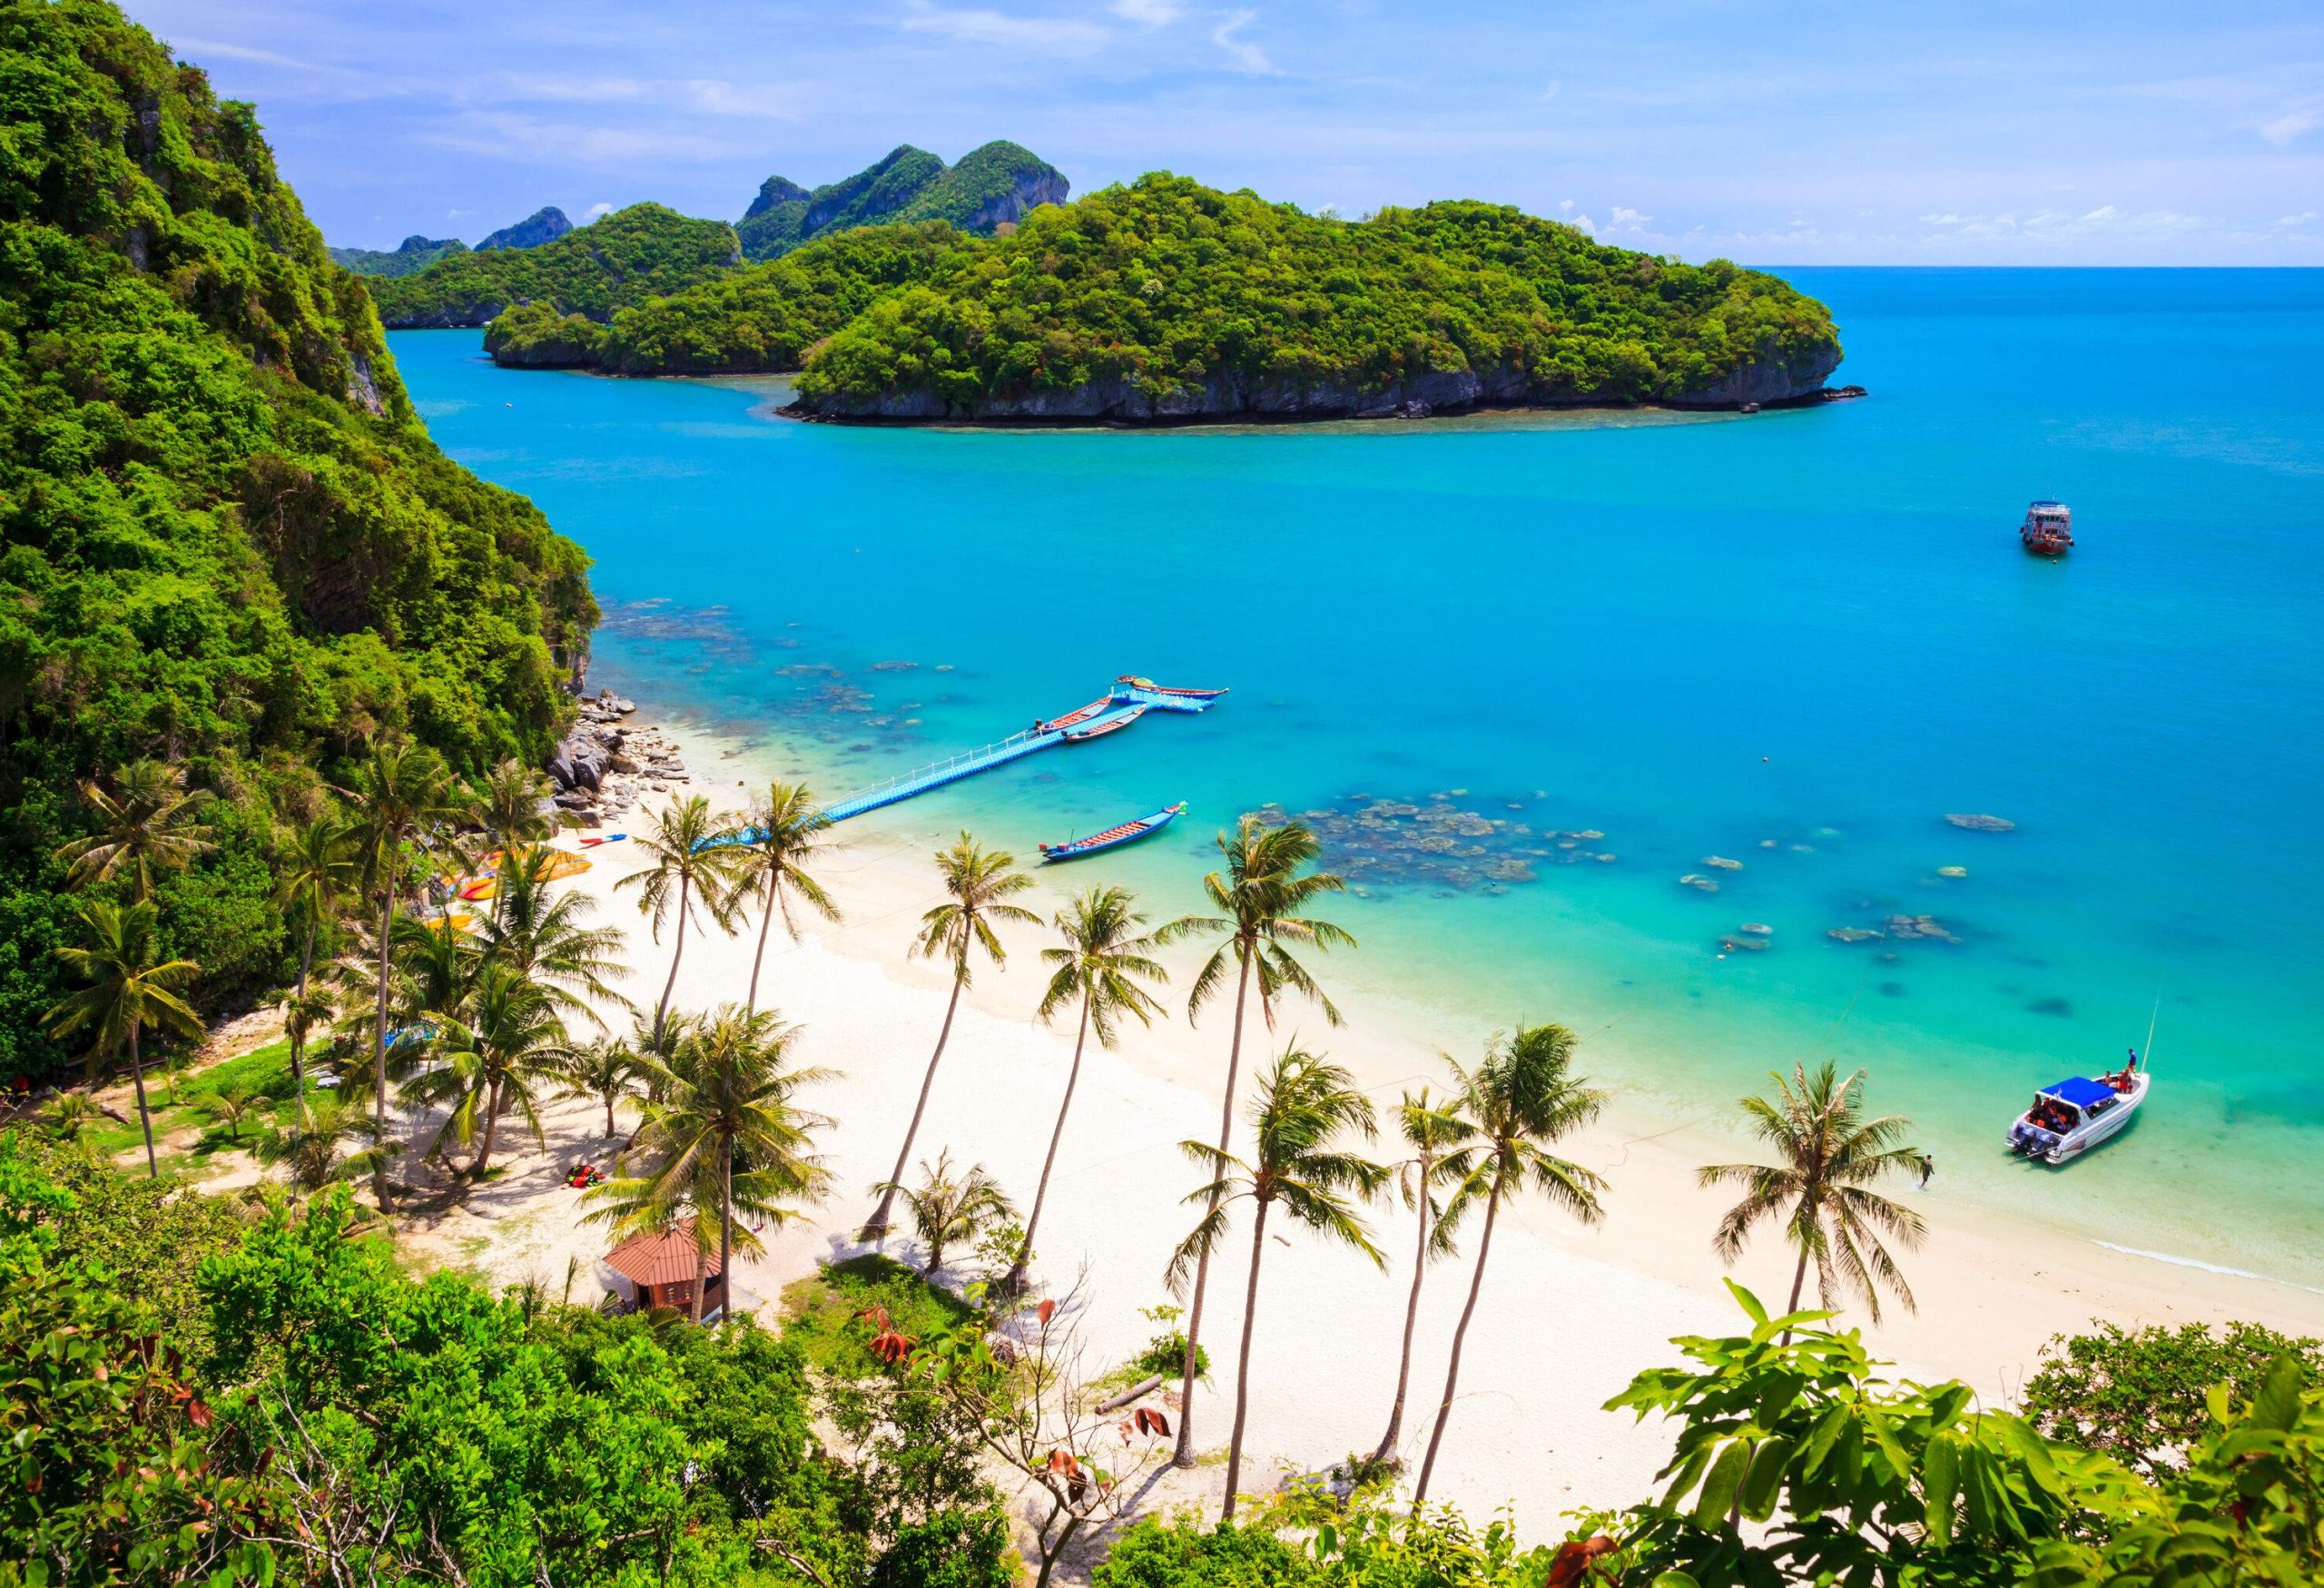 A tropical beach with lushly forested hills across its turquoise waters.